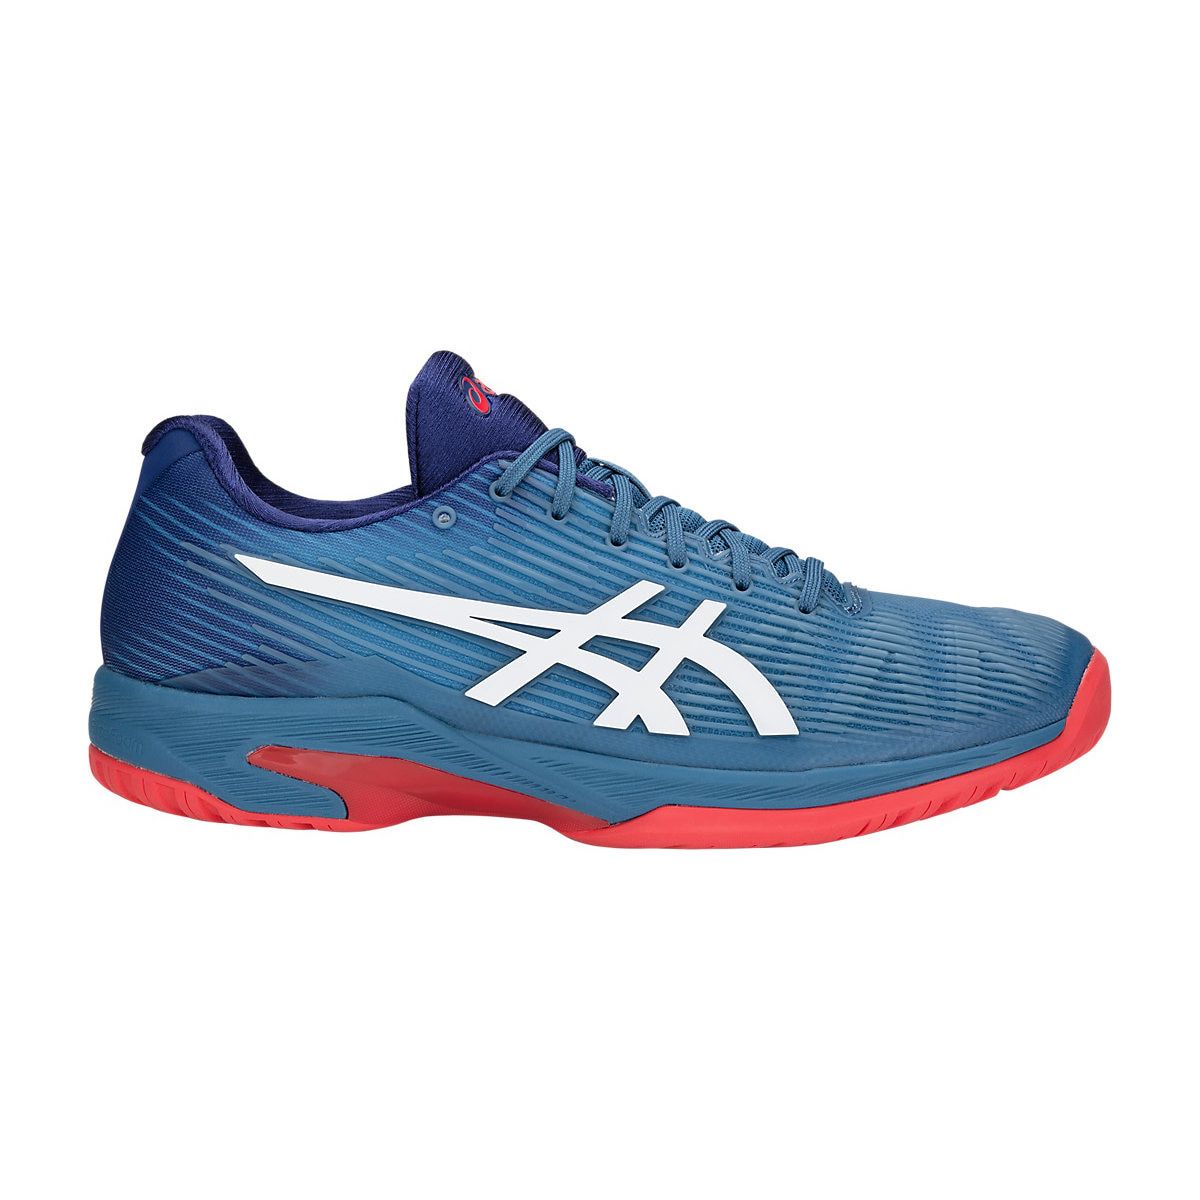 Asics Solution Speed FF Clay Men's Tennis Shoes 1041A004-400